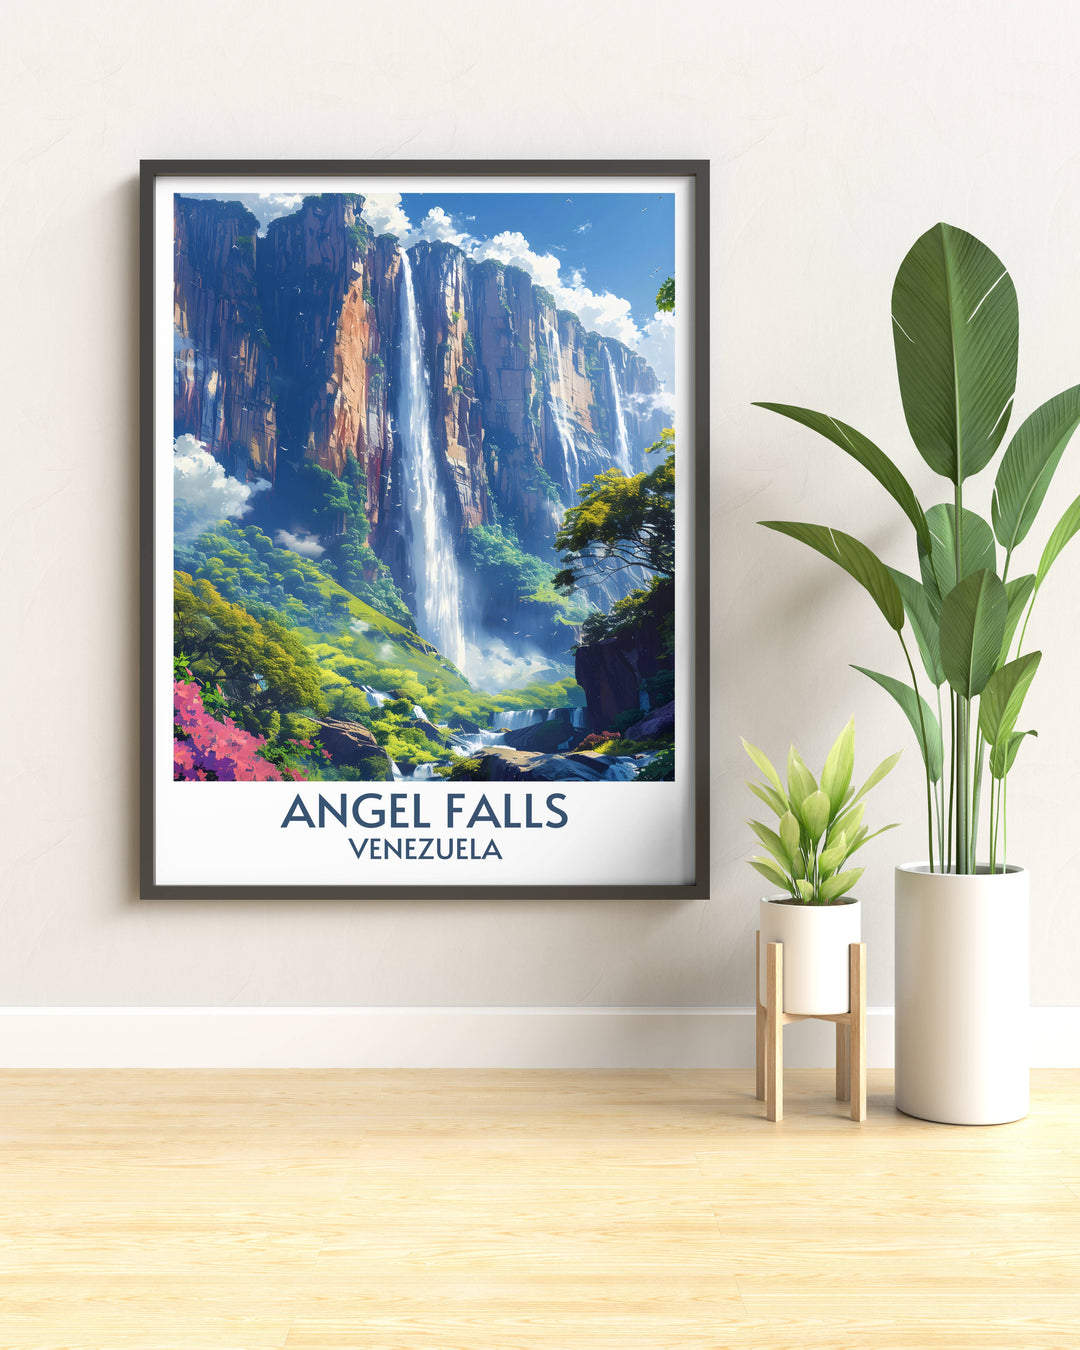 Angel Falls wall art, a framed piece that embodies the adventure and beauty of Venezuela’s natural wonders.